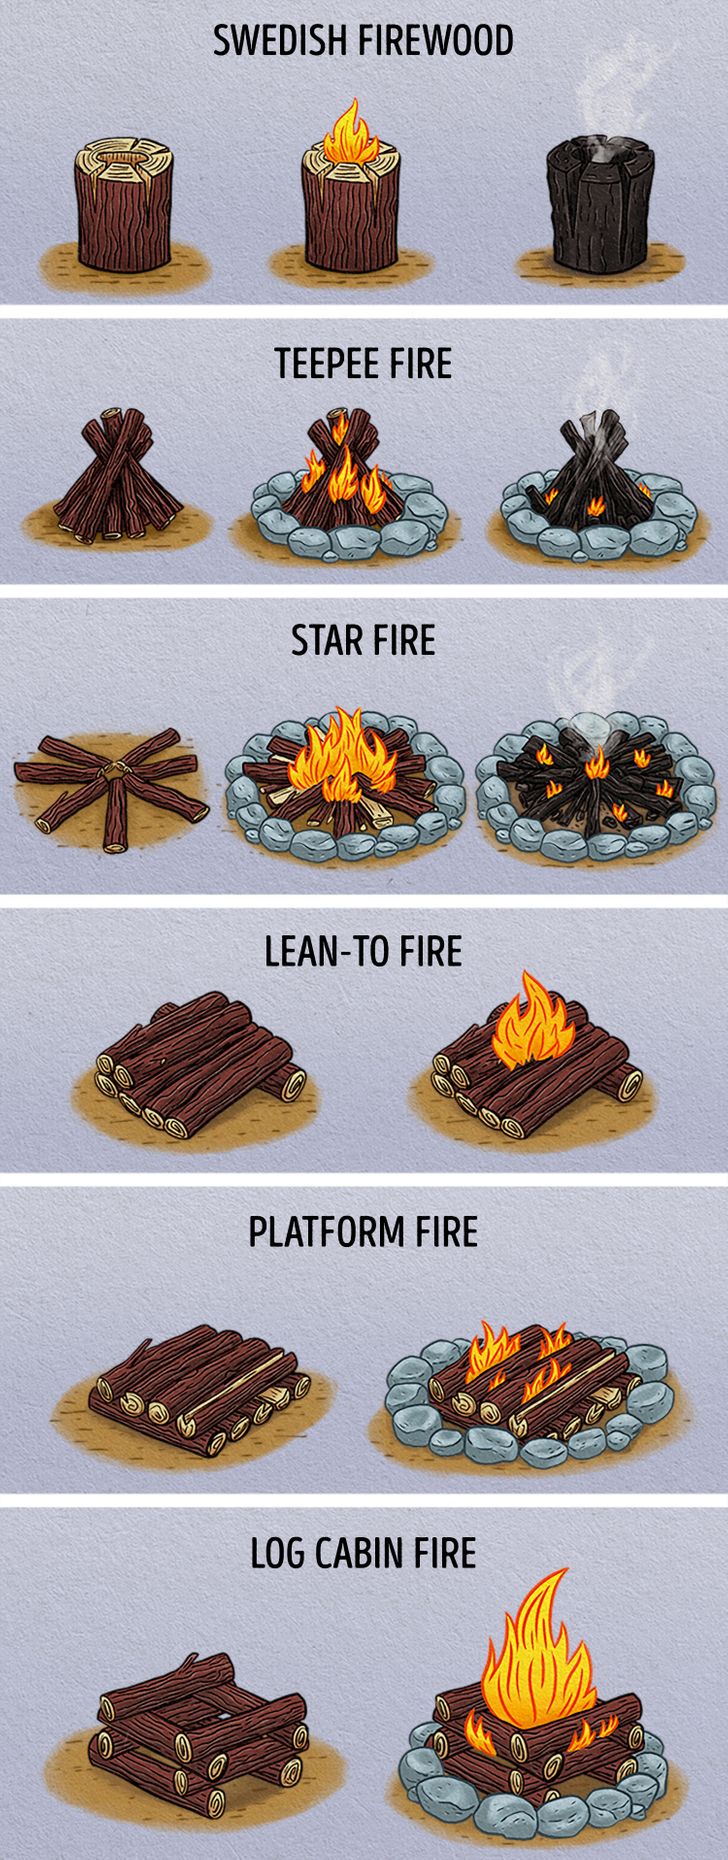 8. What type of fire to make